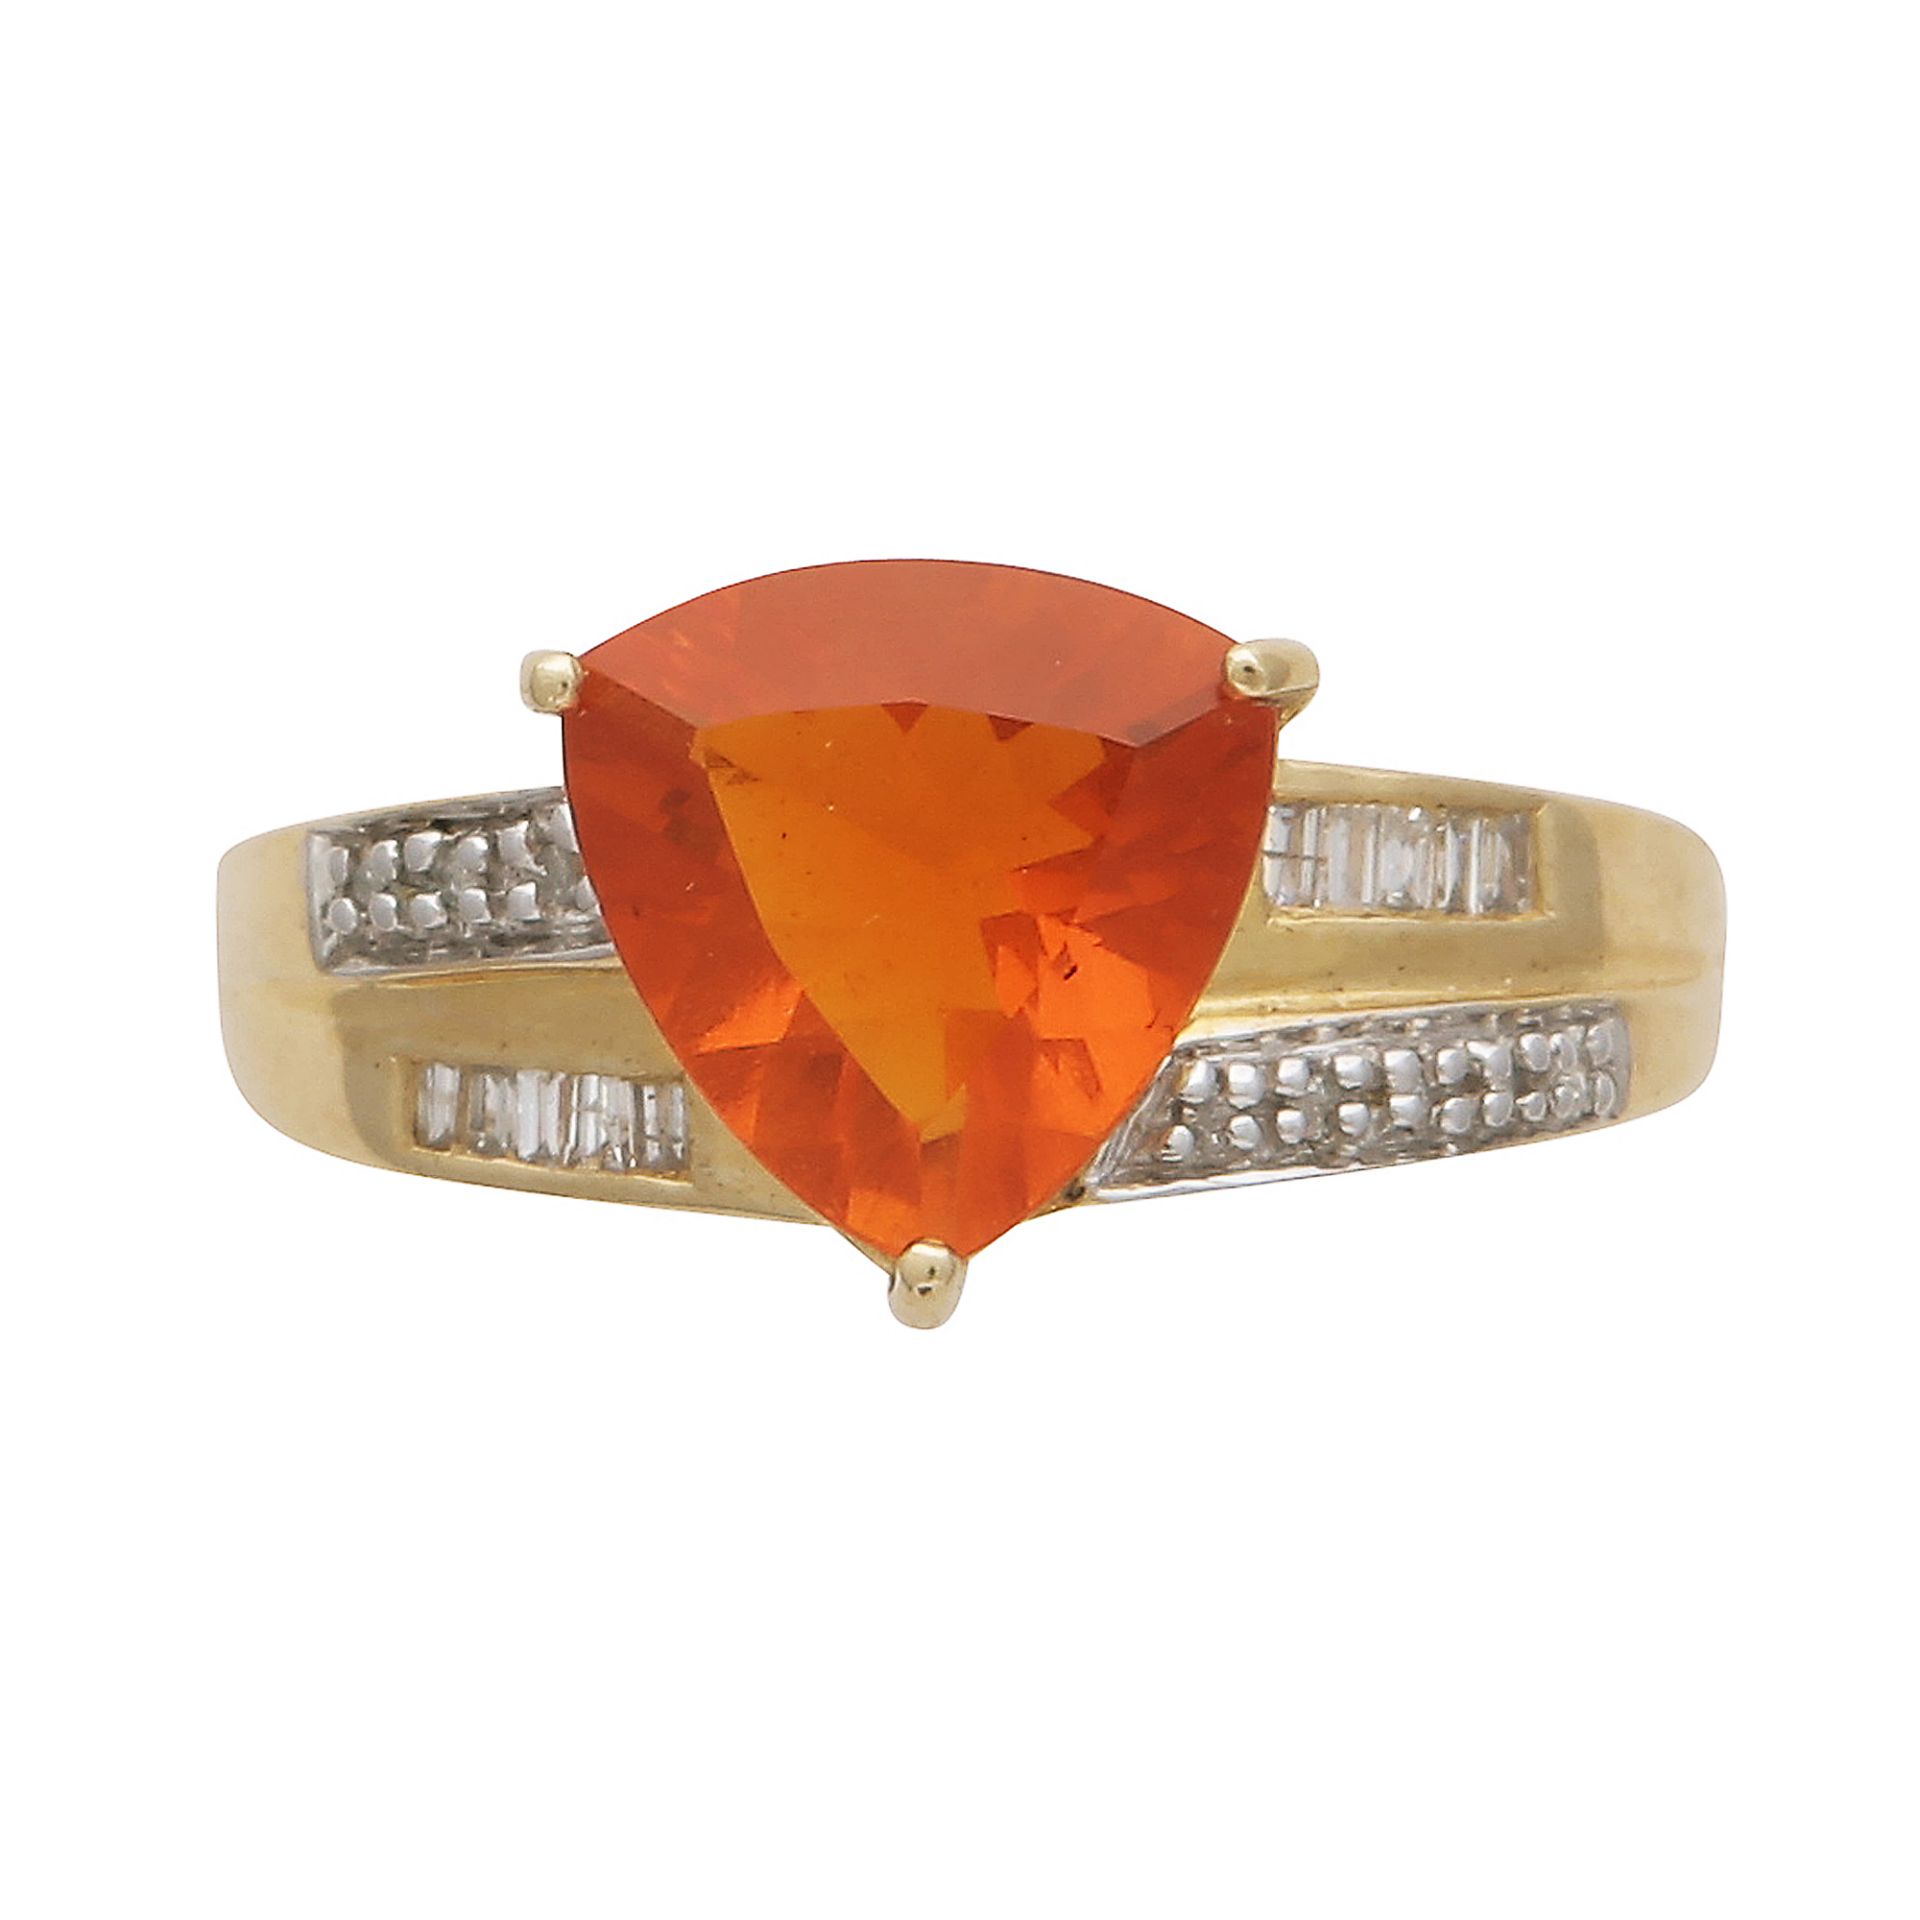 A fire opal and diamond dress ring in 14ct yellow gold set with a trilliant cut orange fire opal and